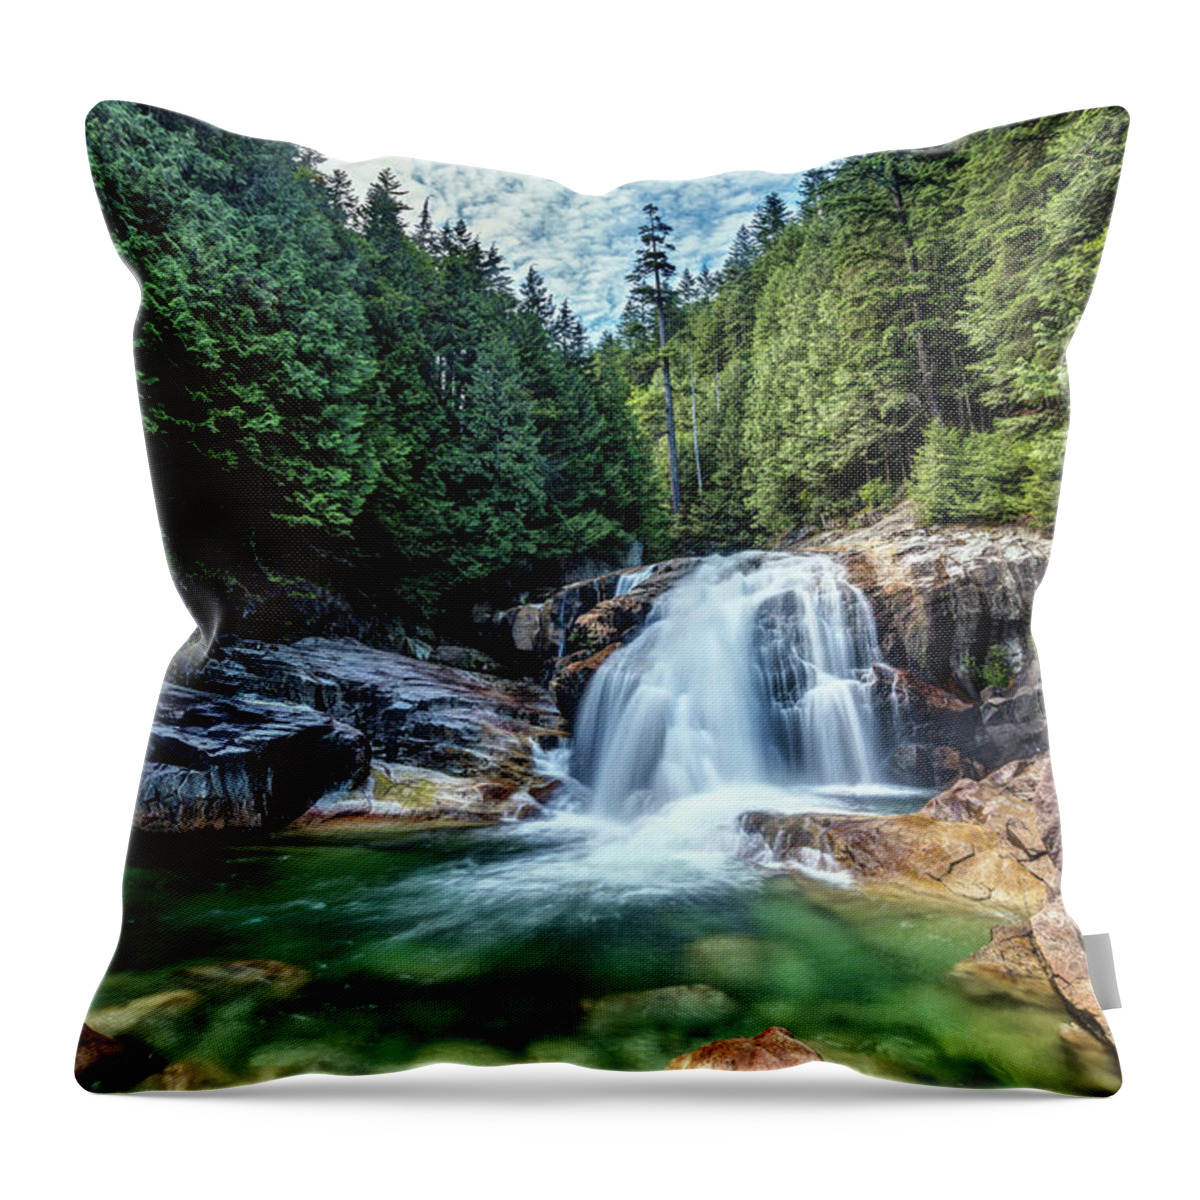 Waterfall Throw Pillow featuring the photograph Lower falls In Golden Ears Park by Pierre Leclerc Photography